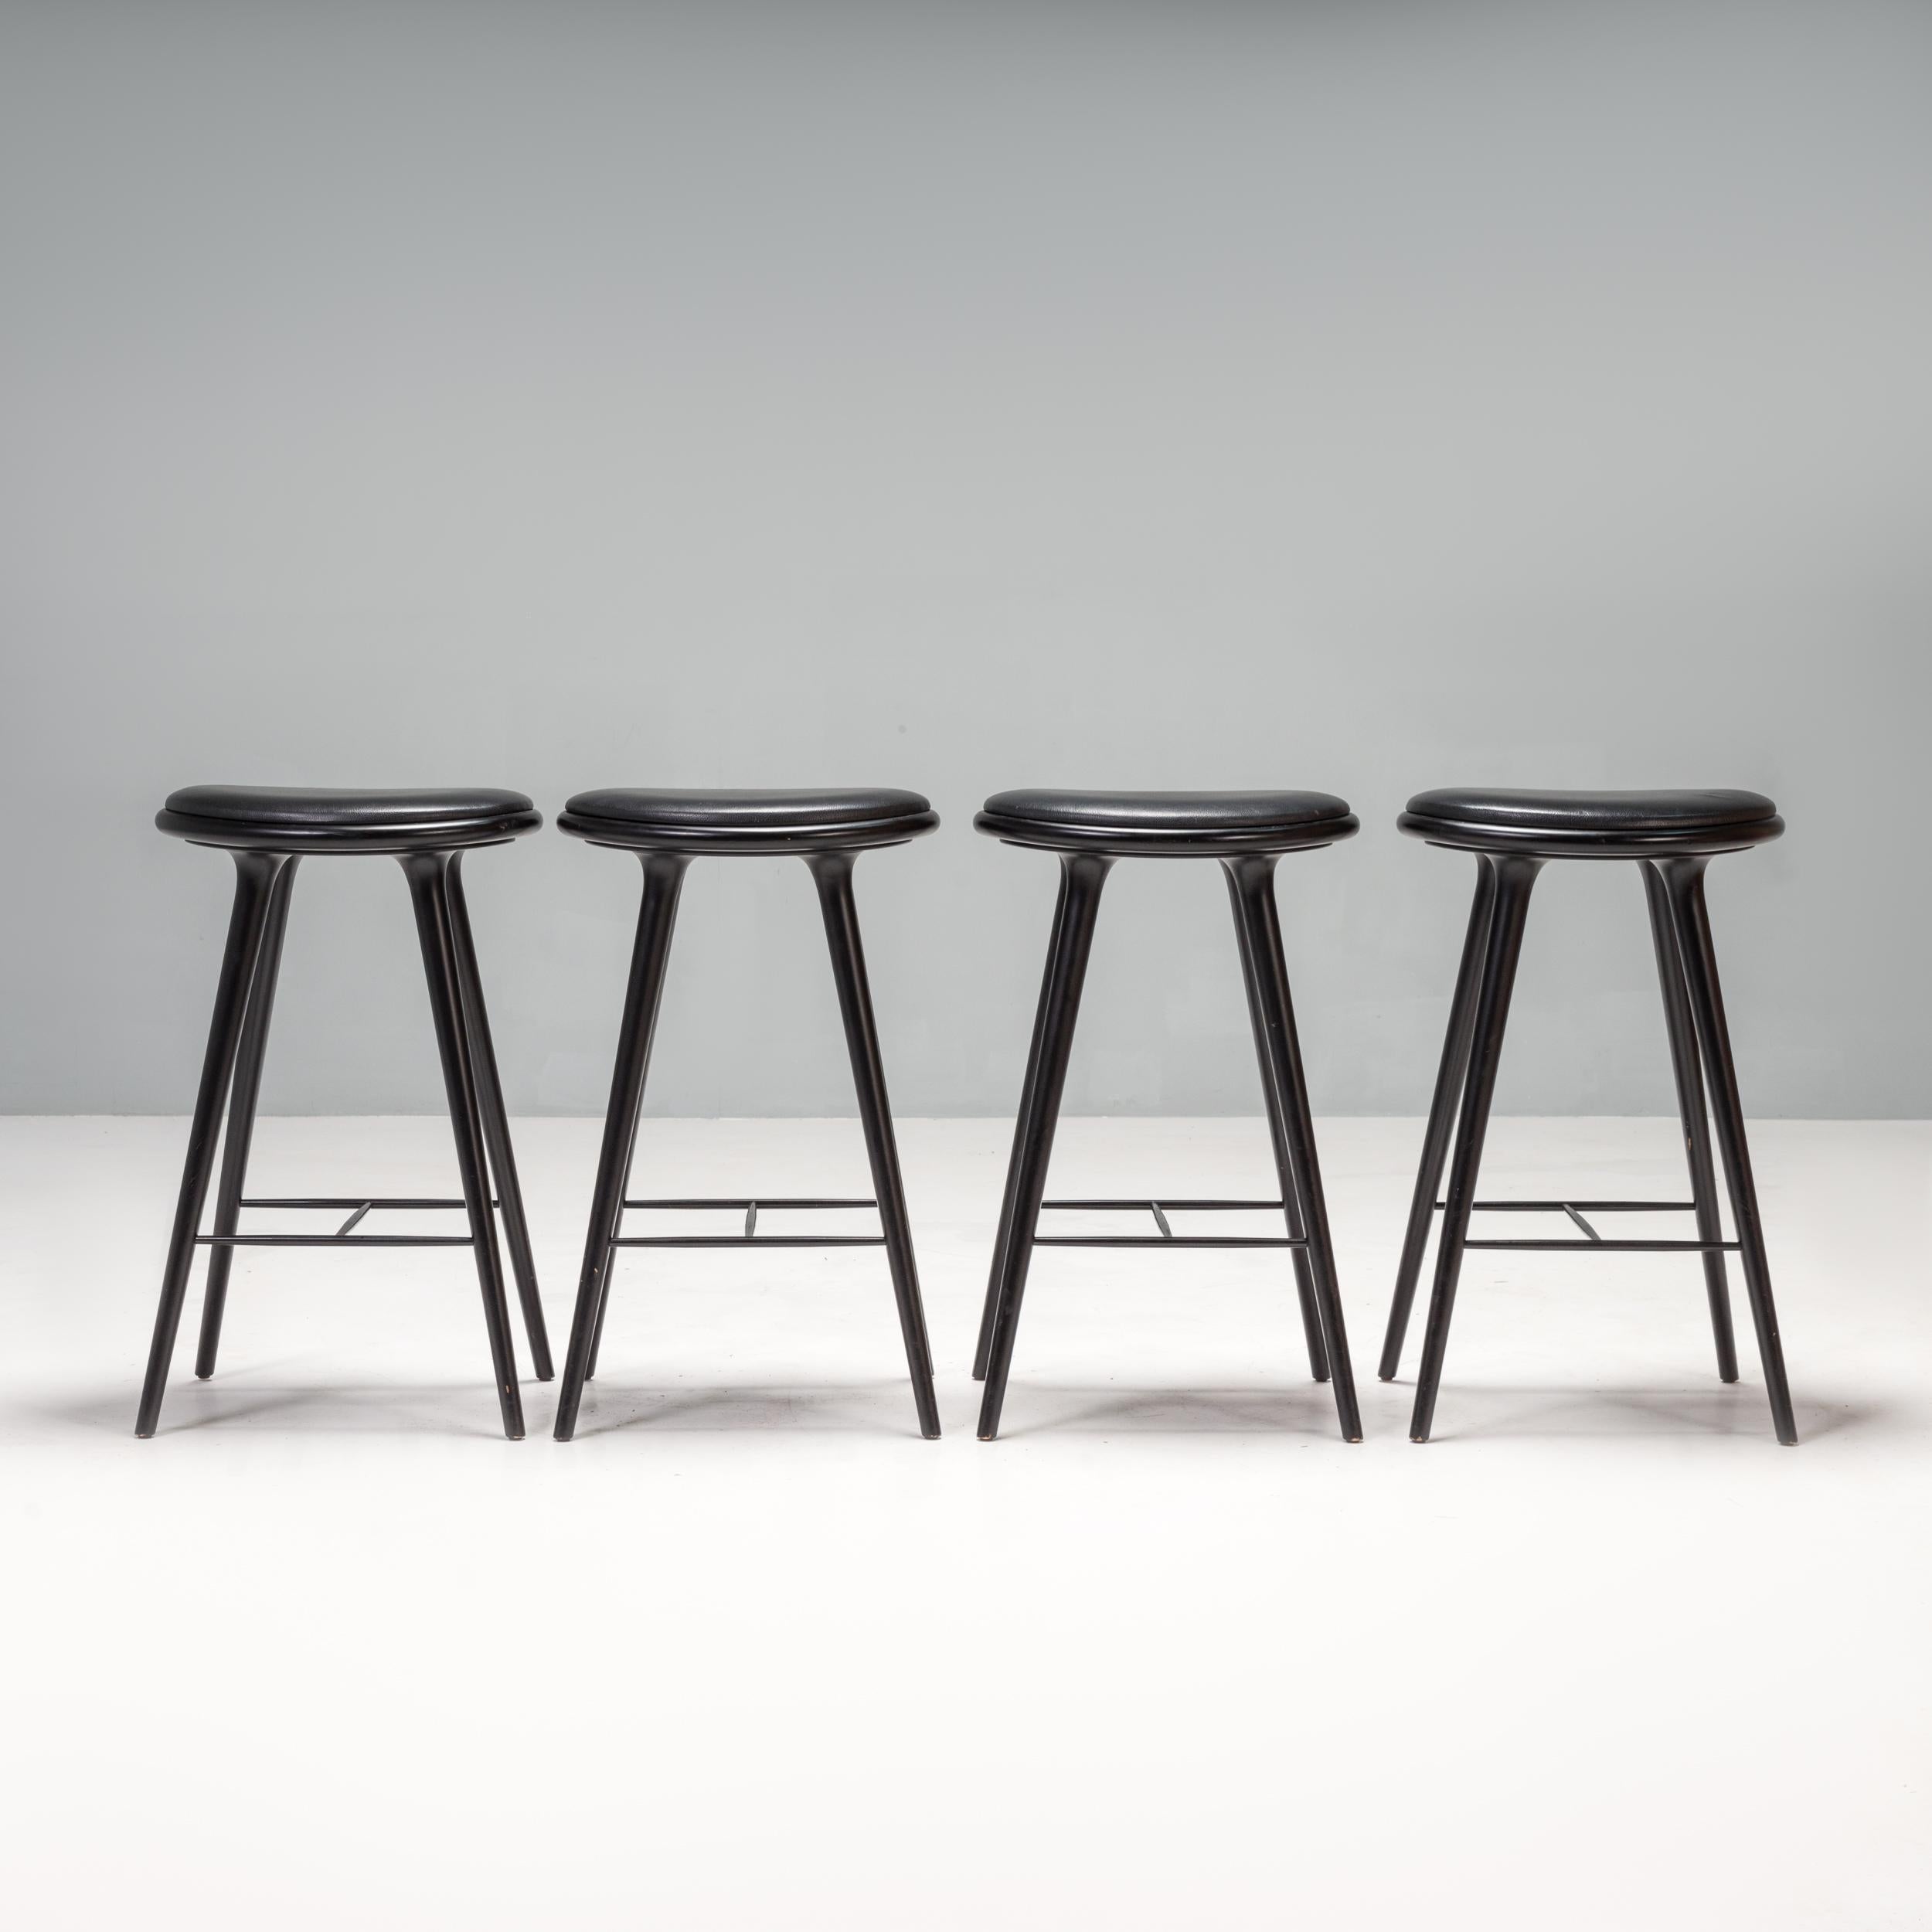 The High Stool was designed by Space Copenhagen and manufactured.

The beechwood features a black lacquer stain and has an organic but minimalist silhouette with softly curved corners and sleek straight lines.

The stools are finished with black